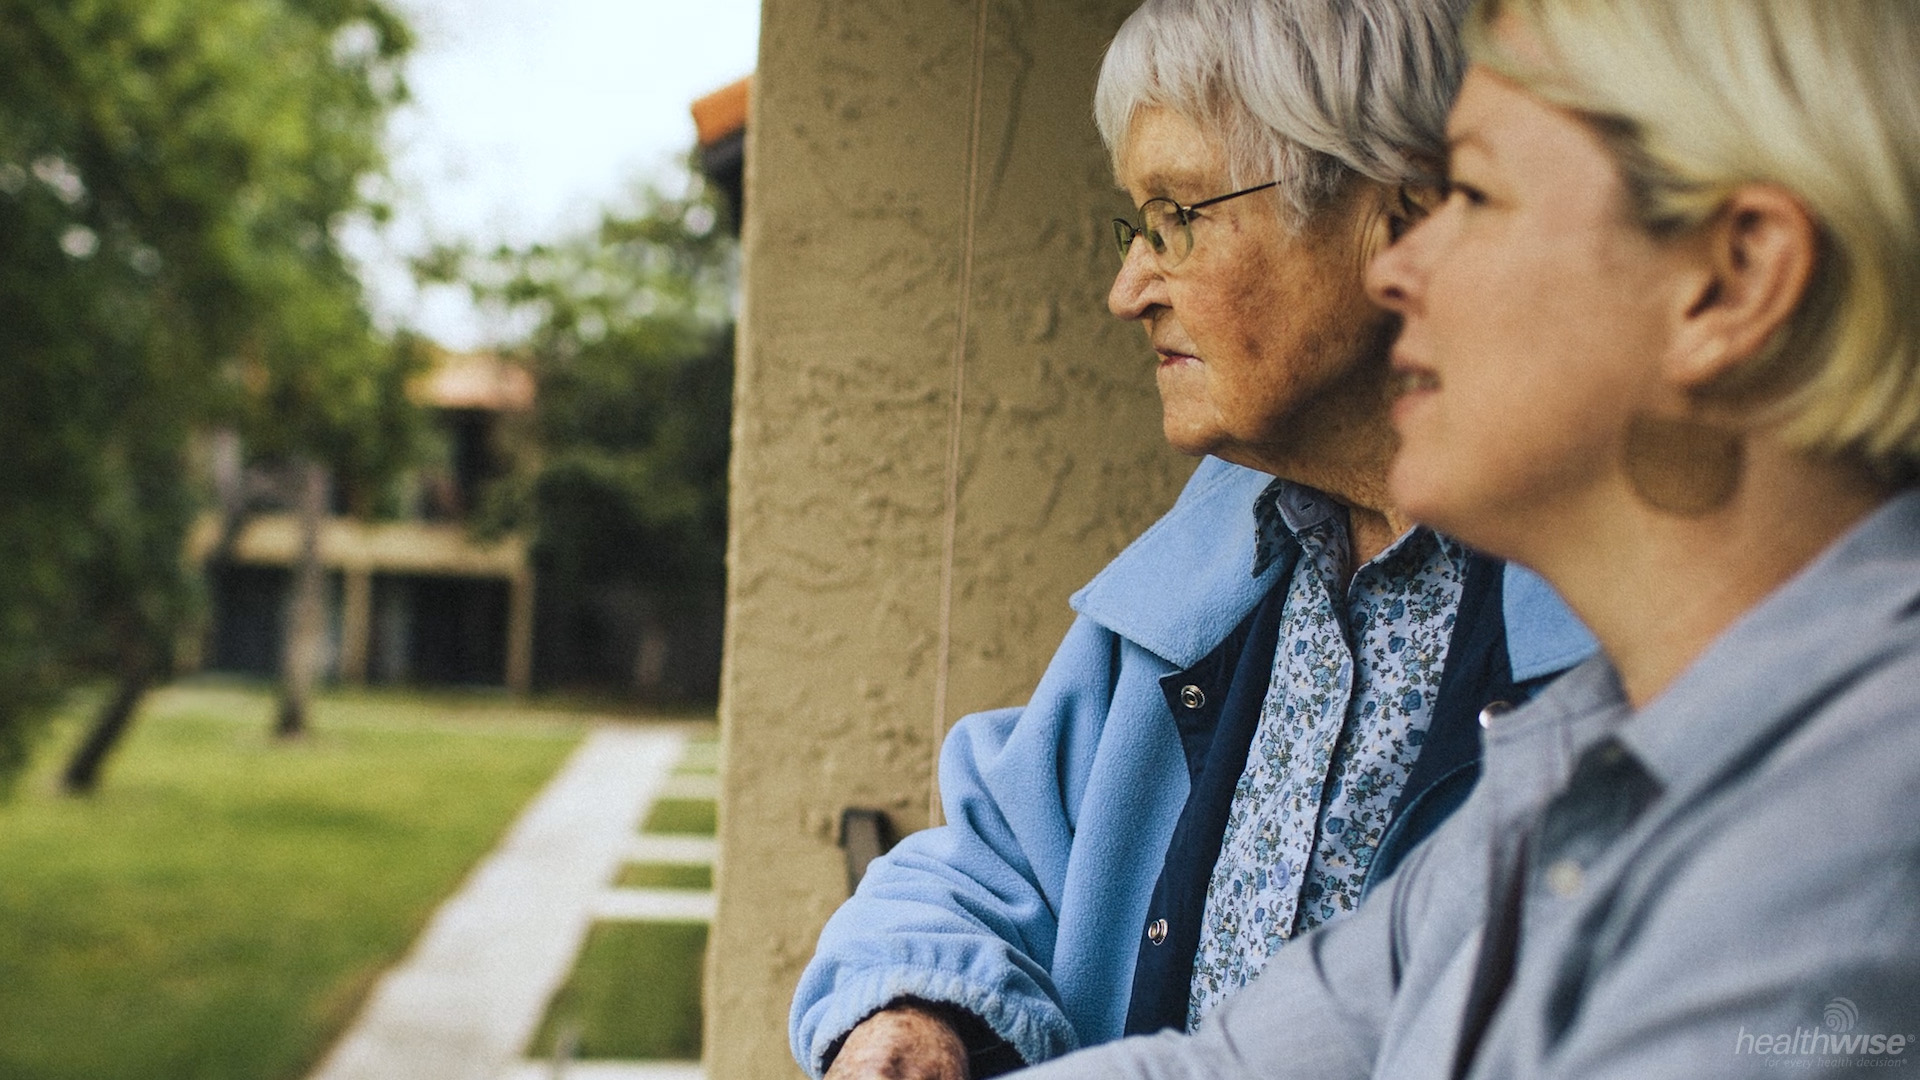  Advance Care Planning: The Need for Ongoing Conversations